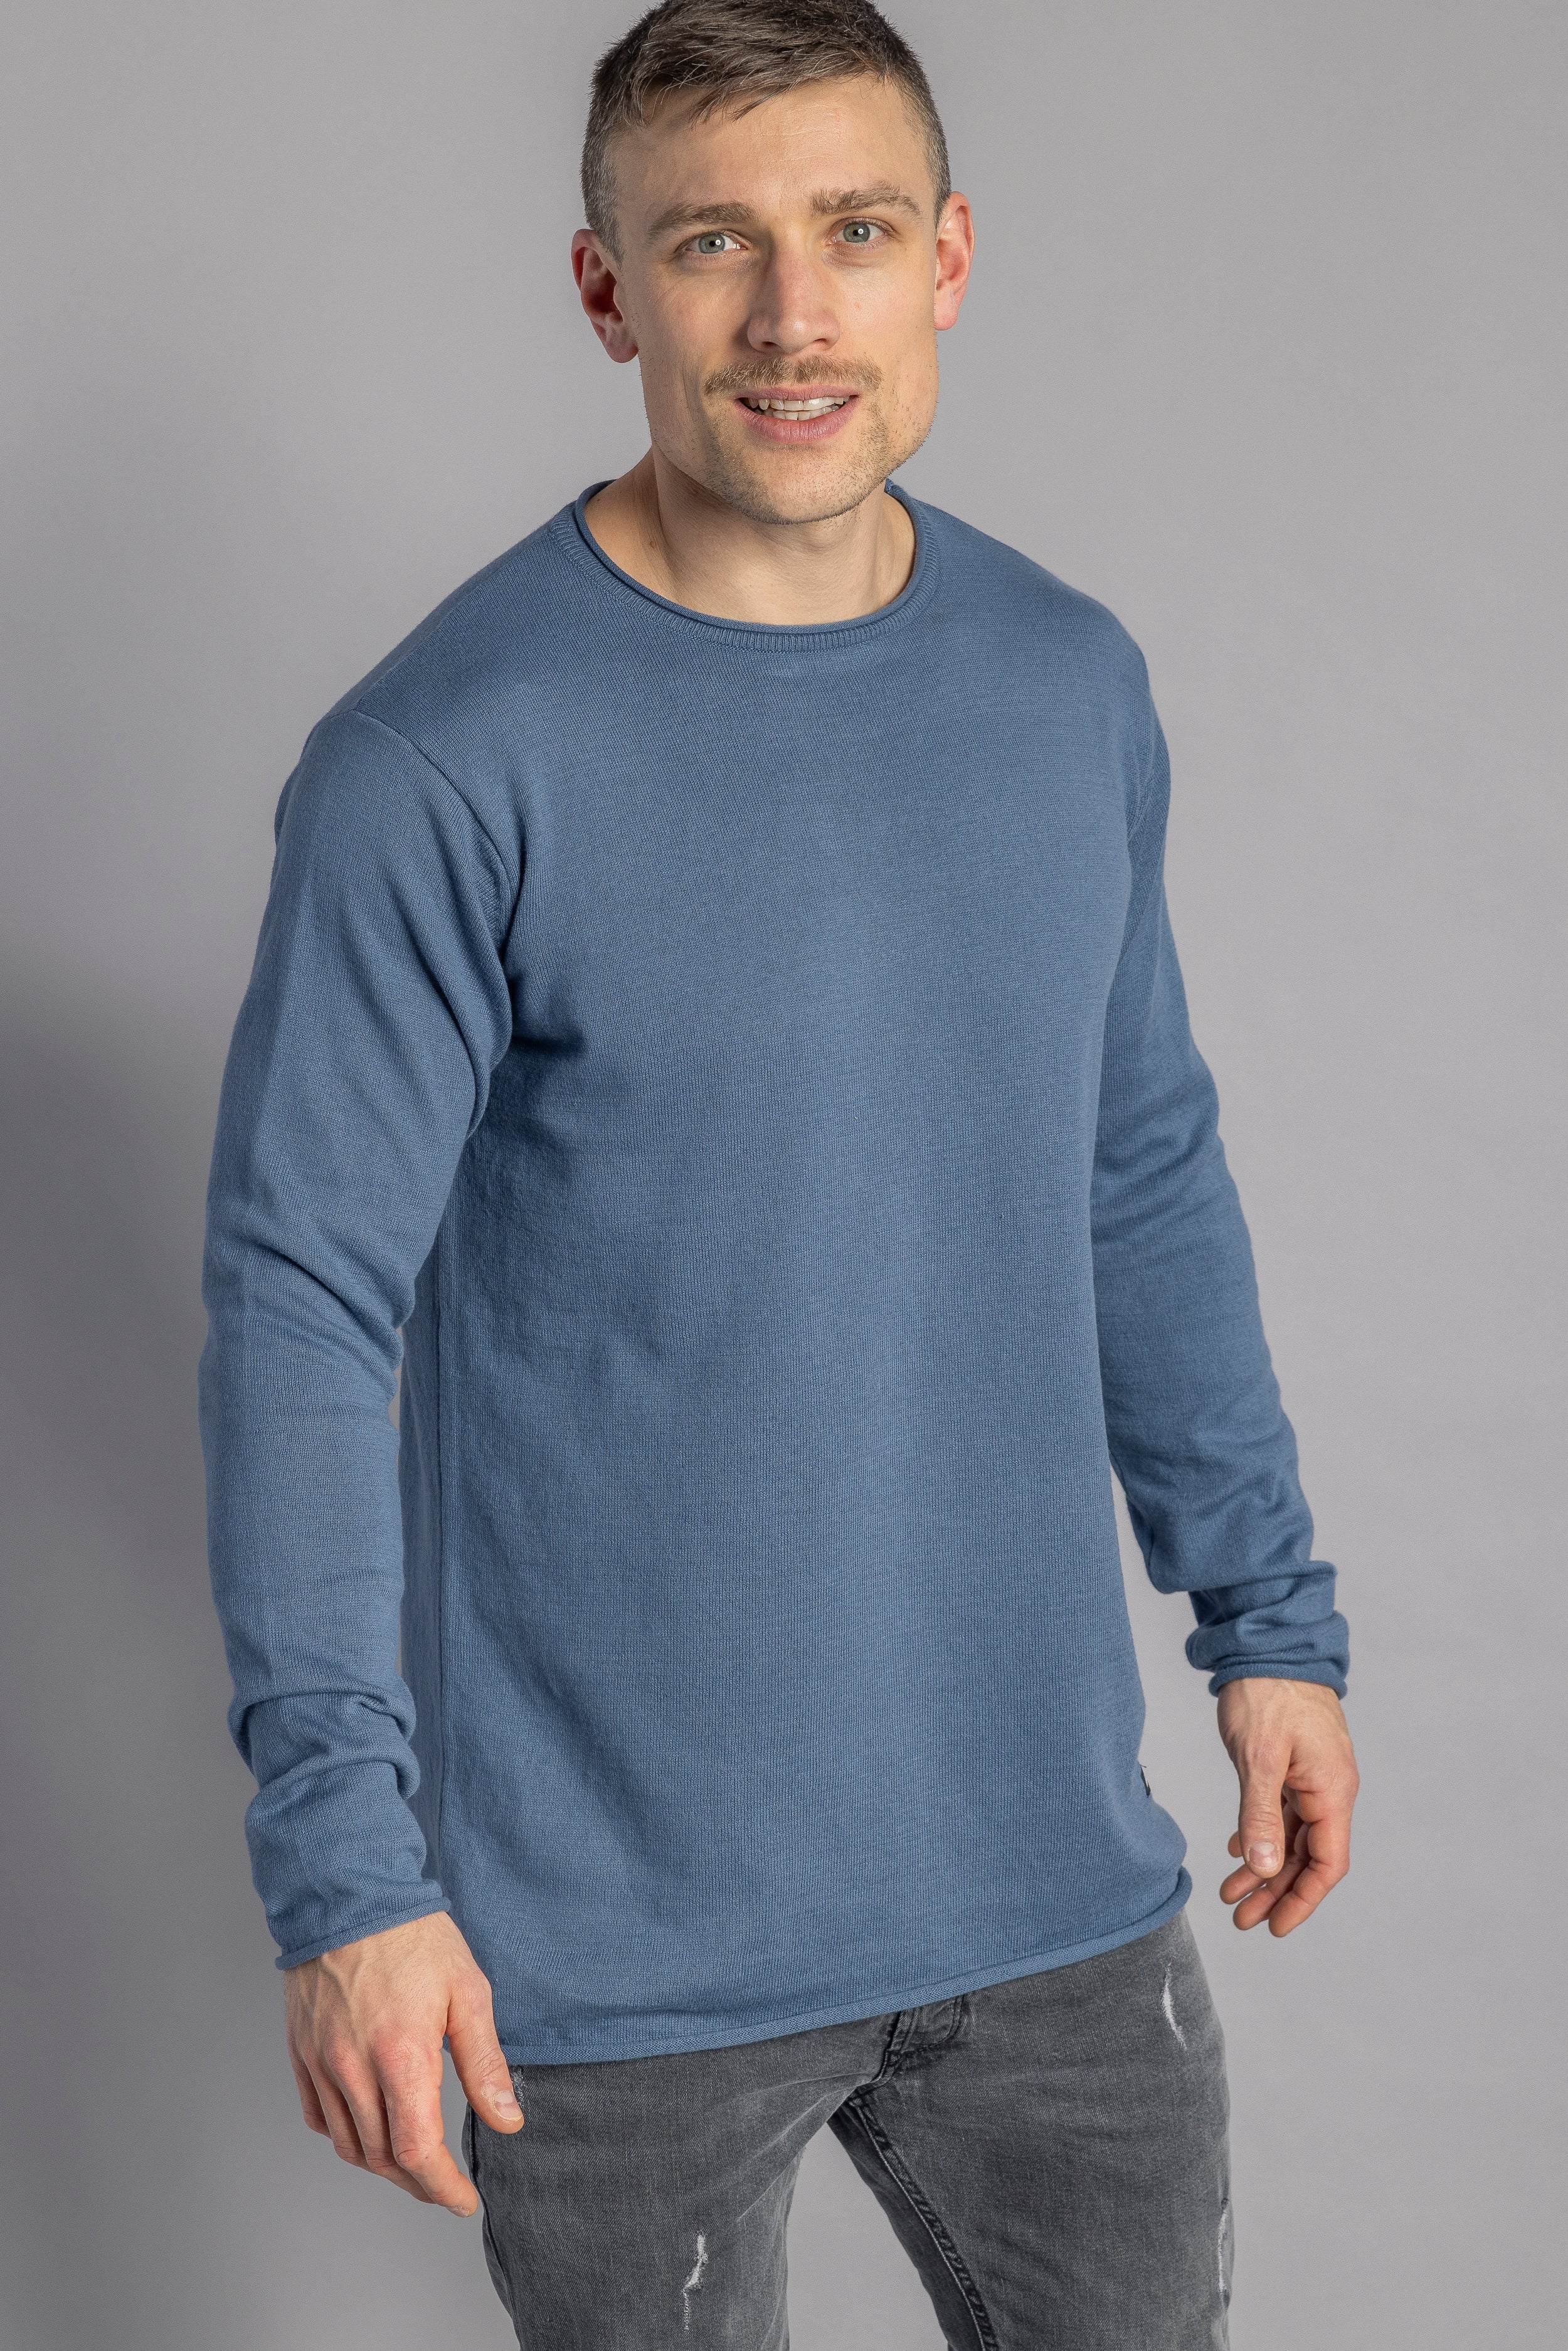 Blue knitted long-sleeve sweater made of 100% organic cotton from DIRTS